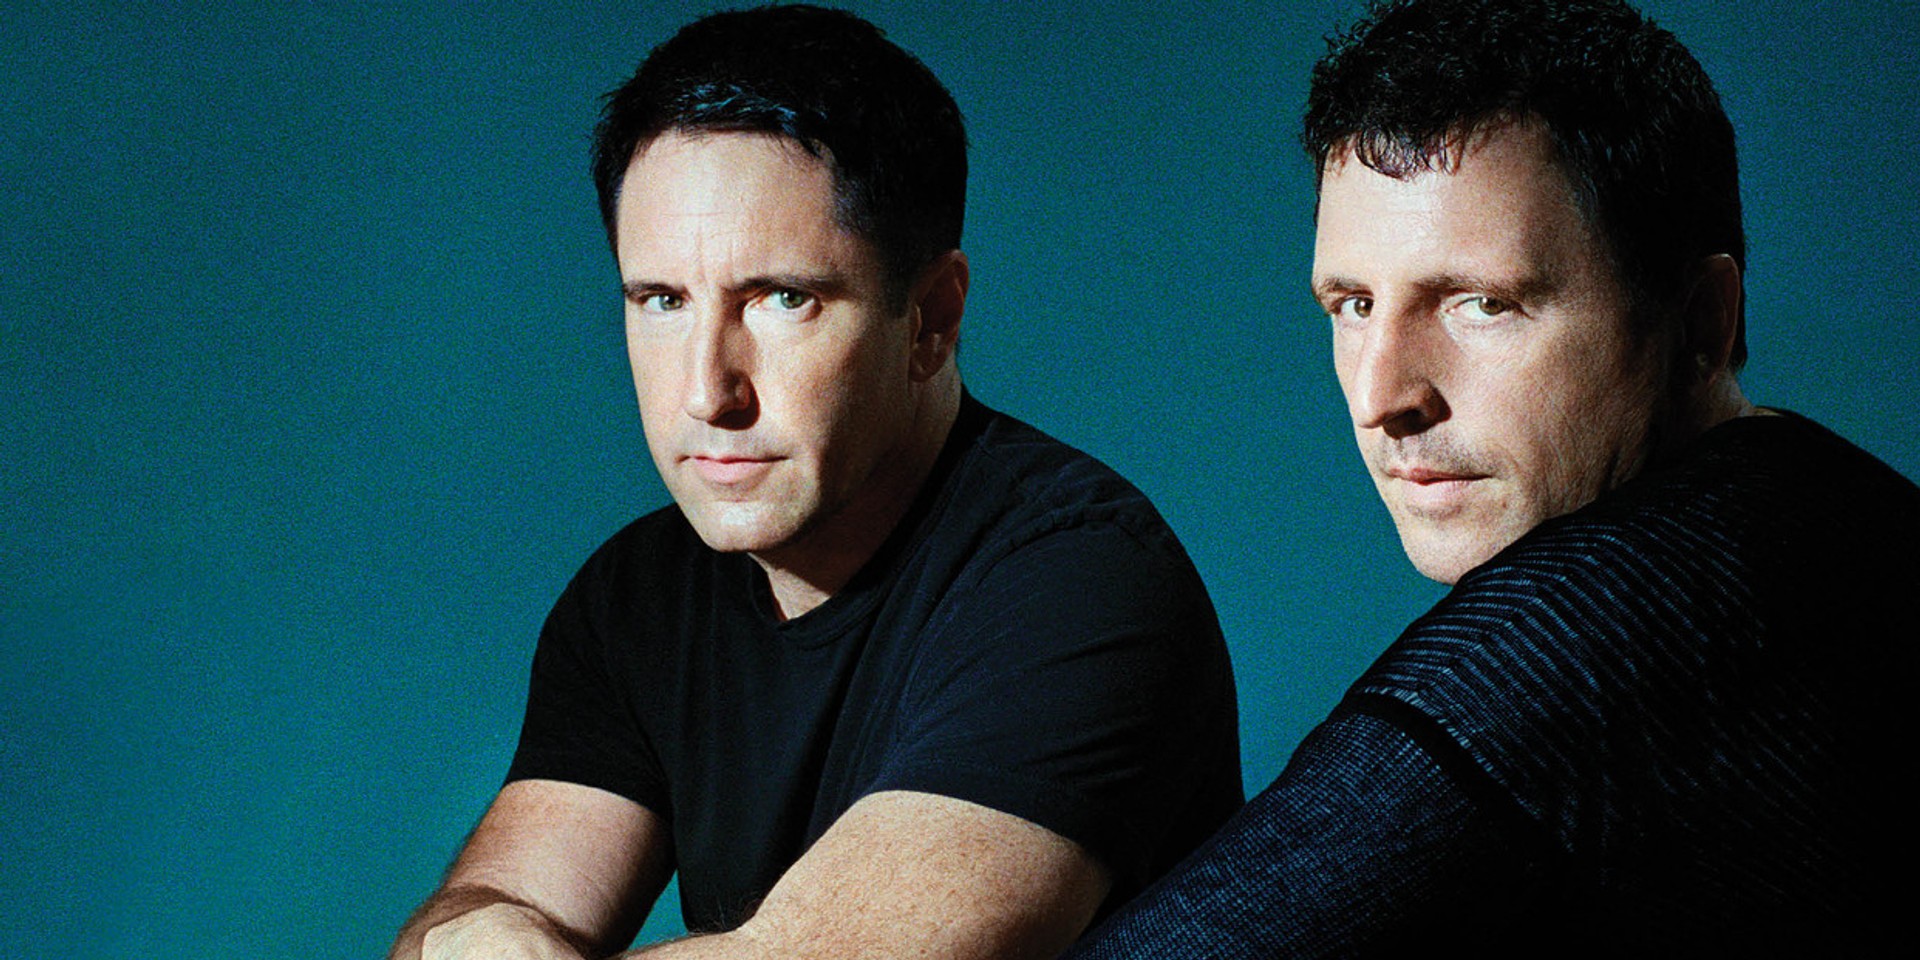 Nine Inch Nails' Trent Reznor and Atticus Ross to score upcoming Pixar film, Soul